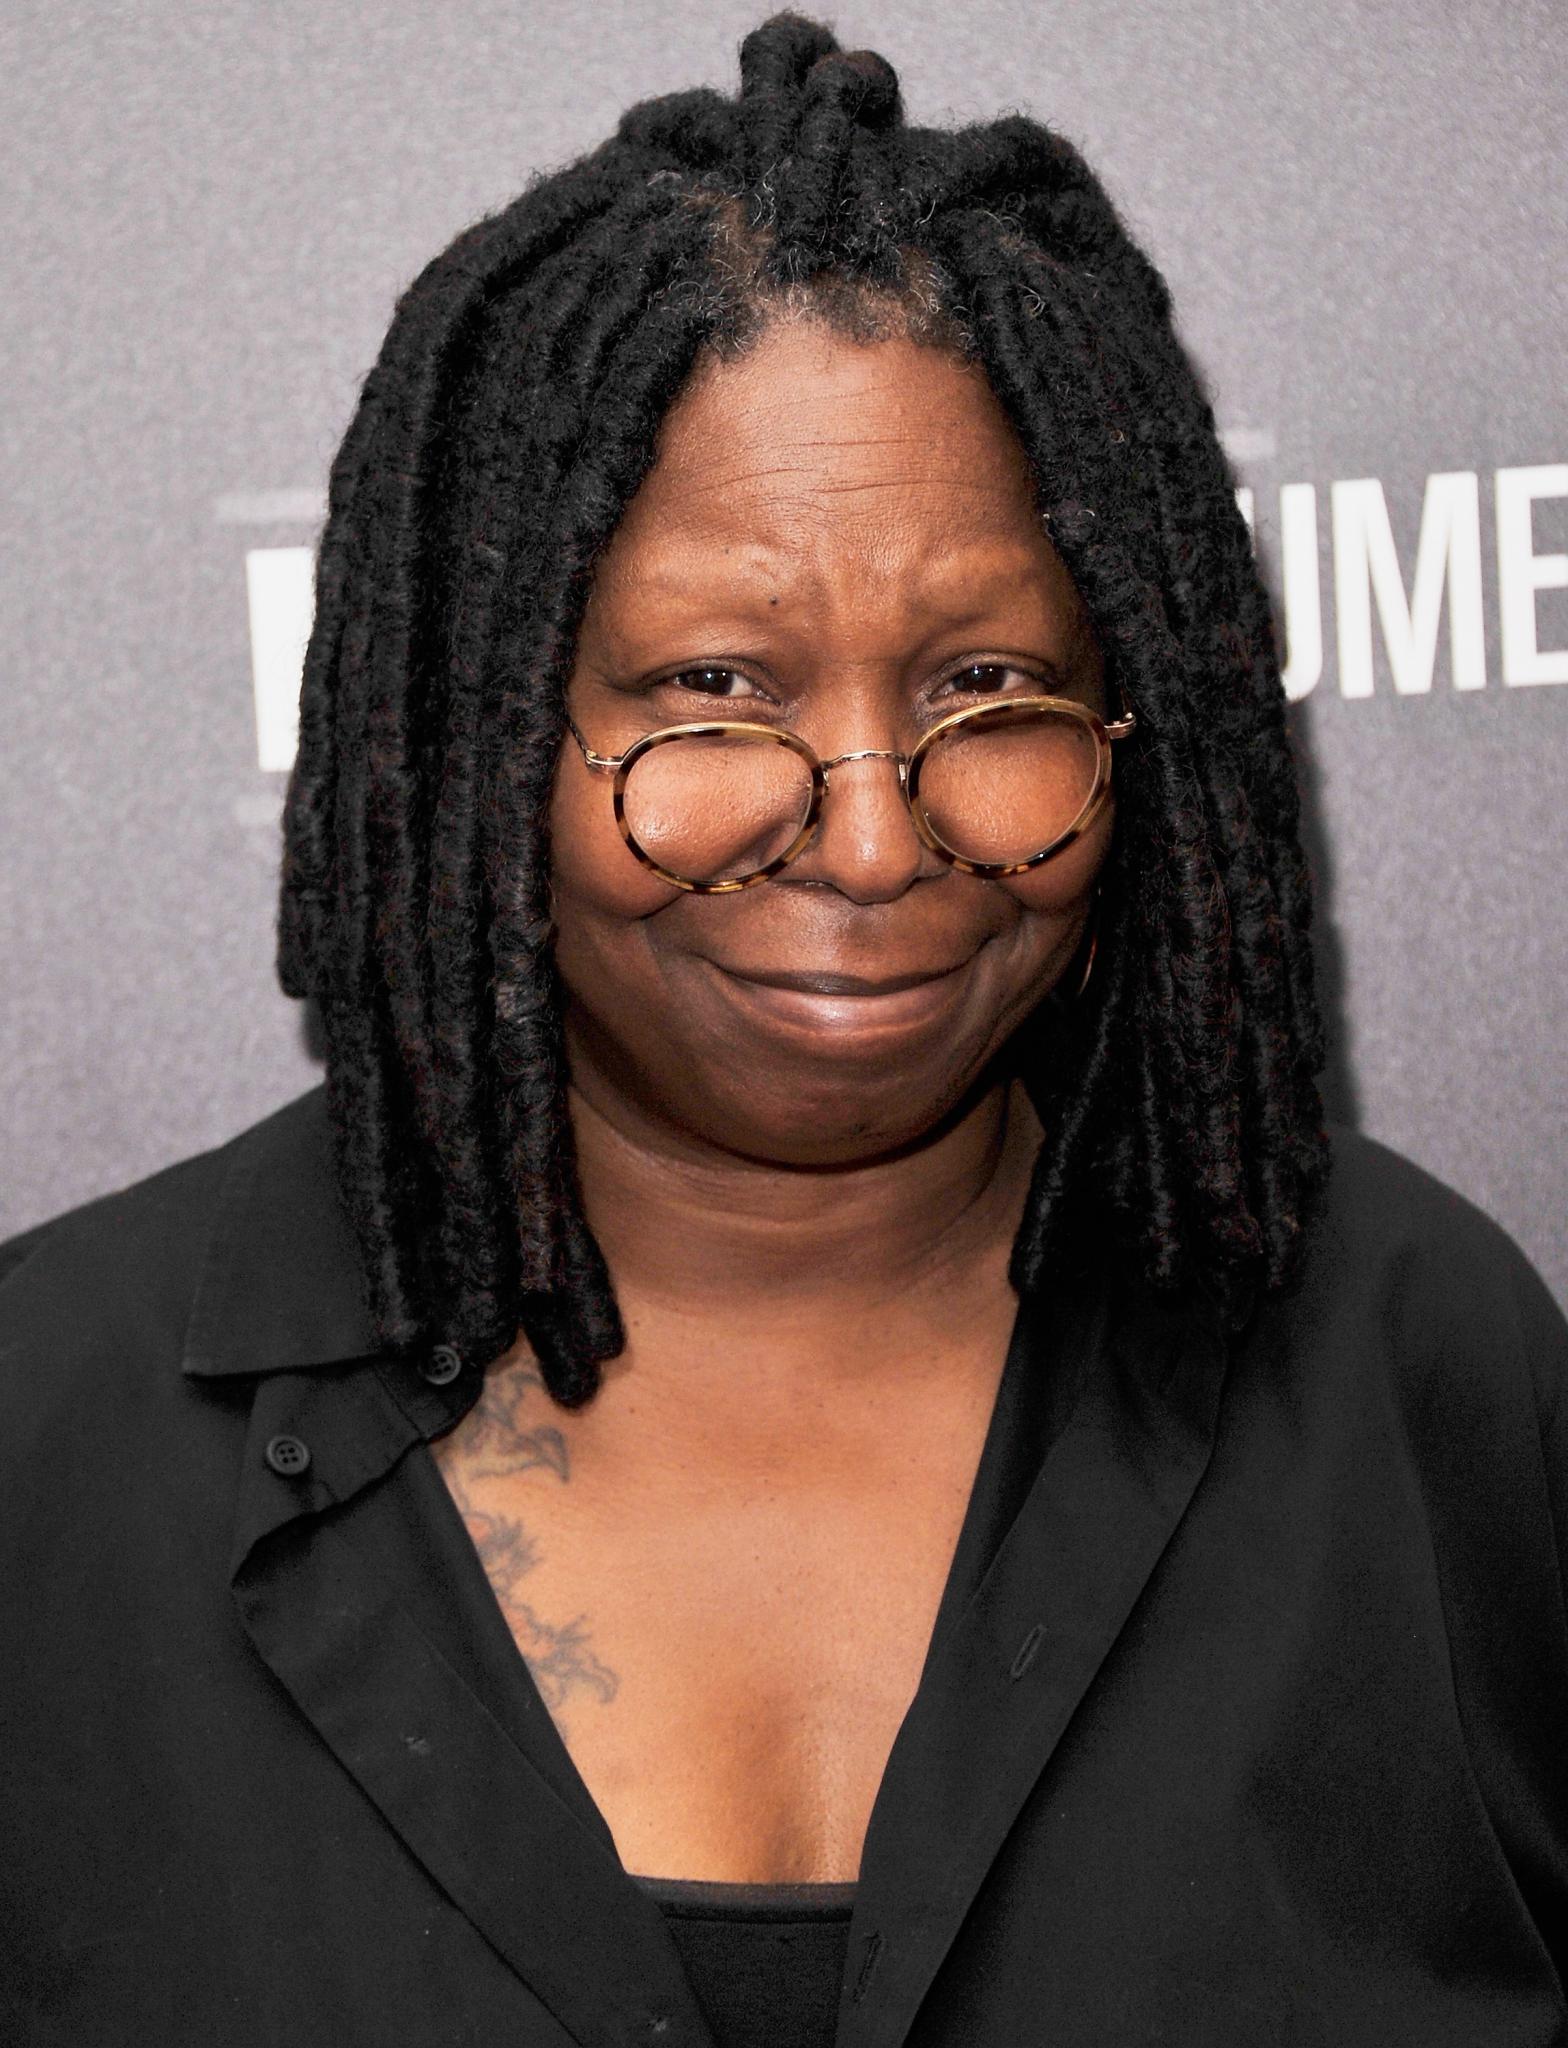 whoopi goldberg is producing a series about transgender